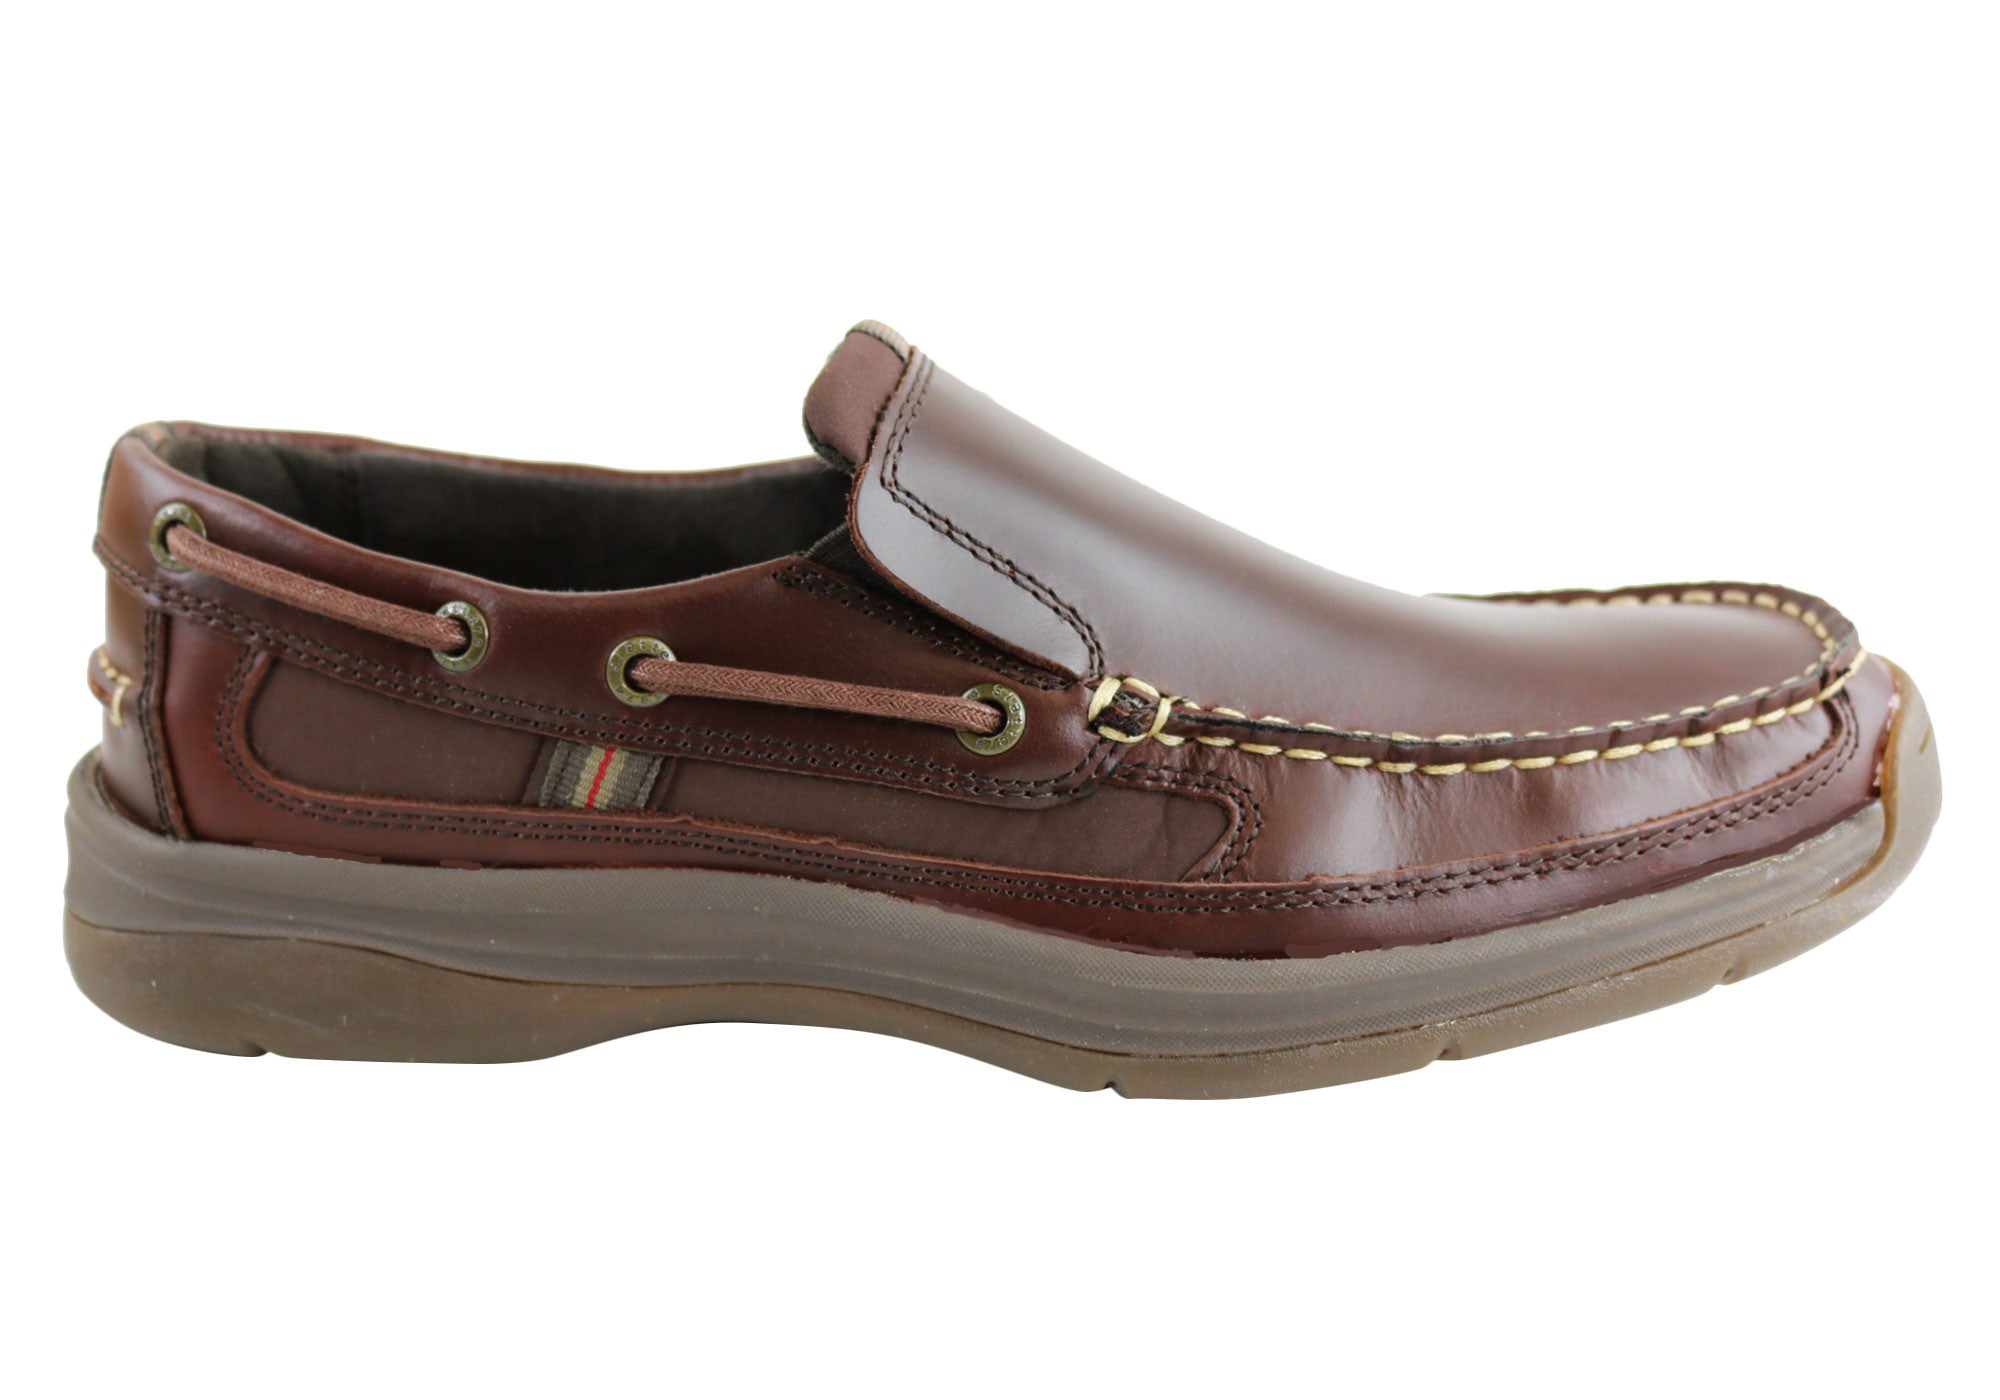 rugged slip on shoes